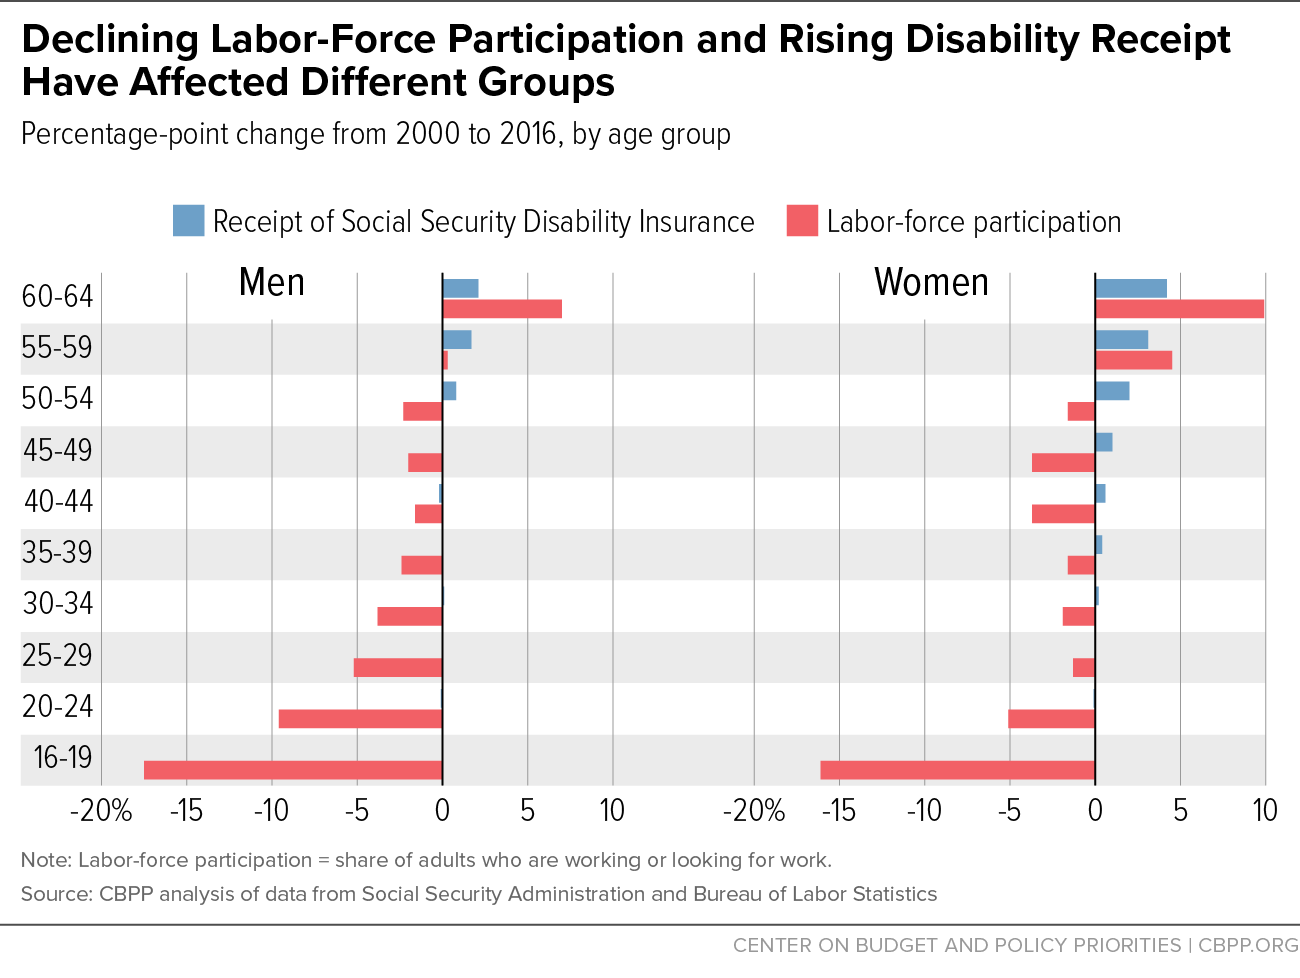 Declining Labor-Force Participation and Rising Disability Receipt Have Affected Different Groups